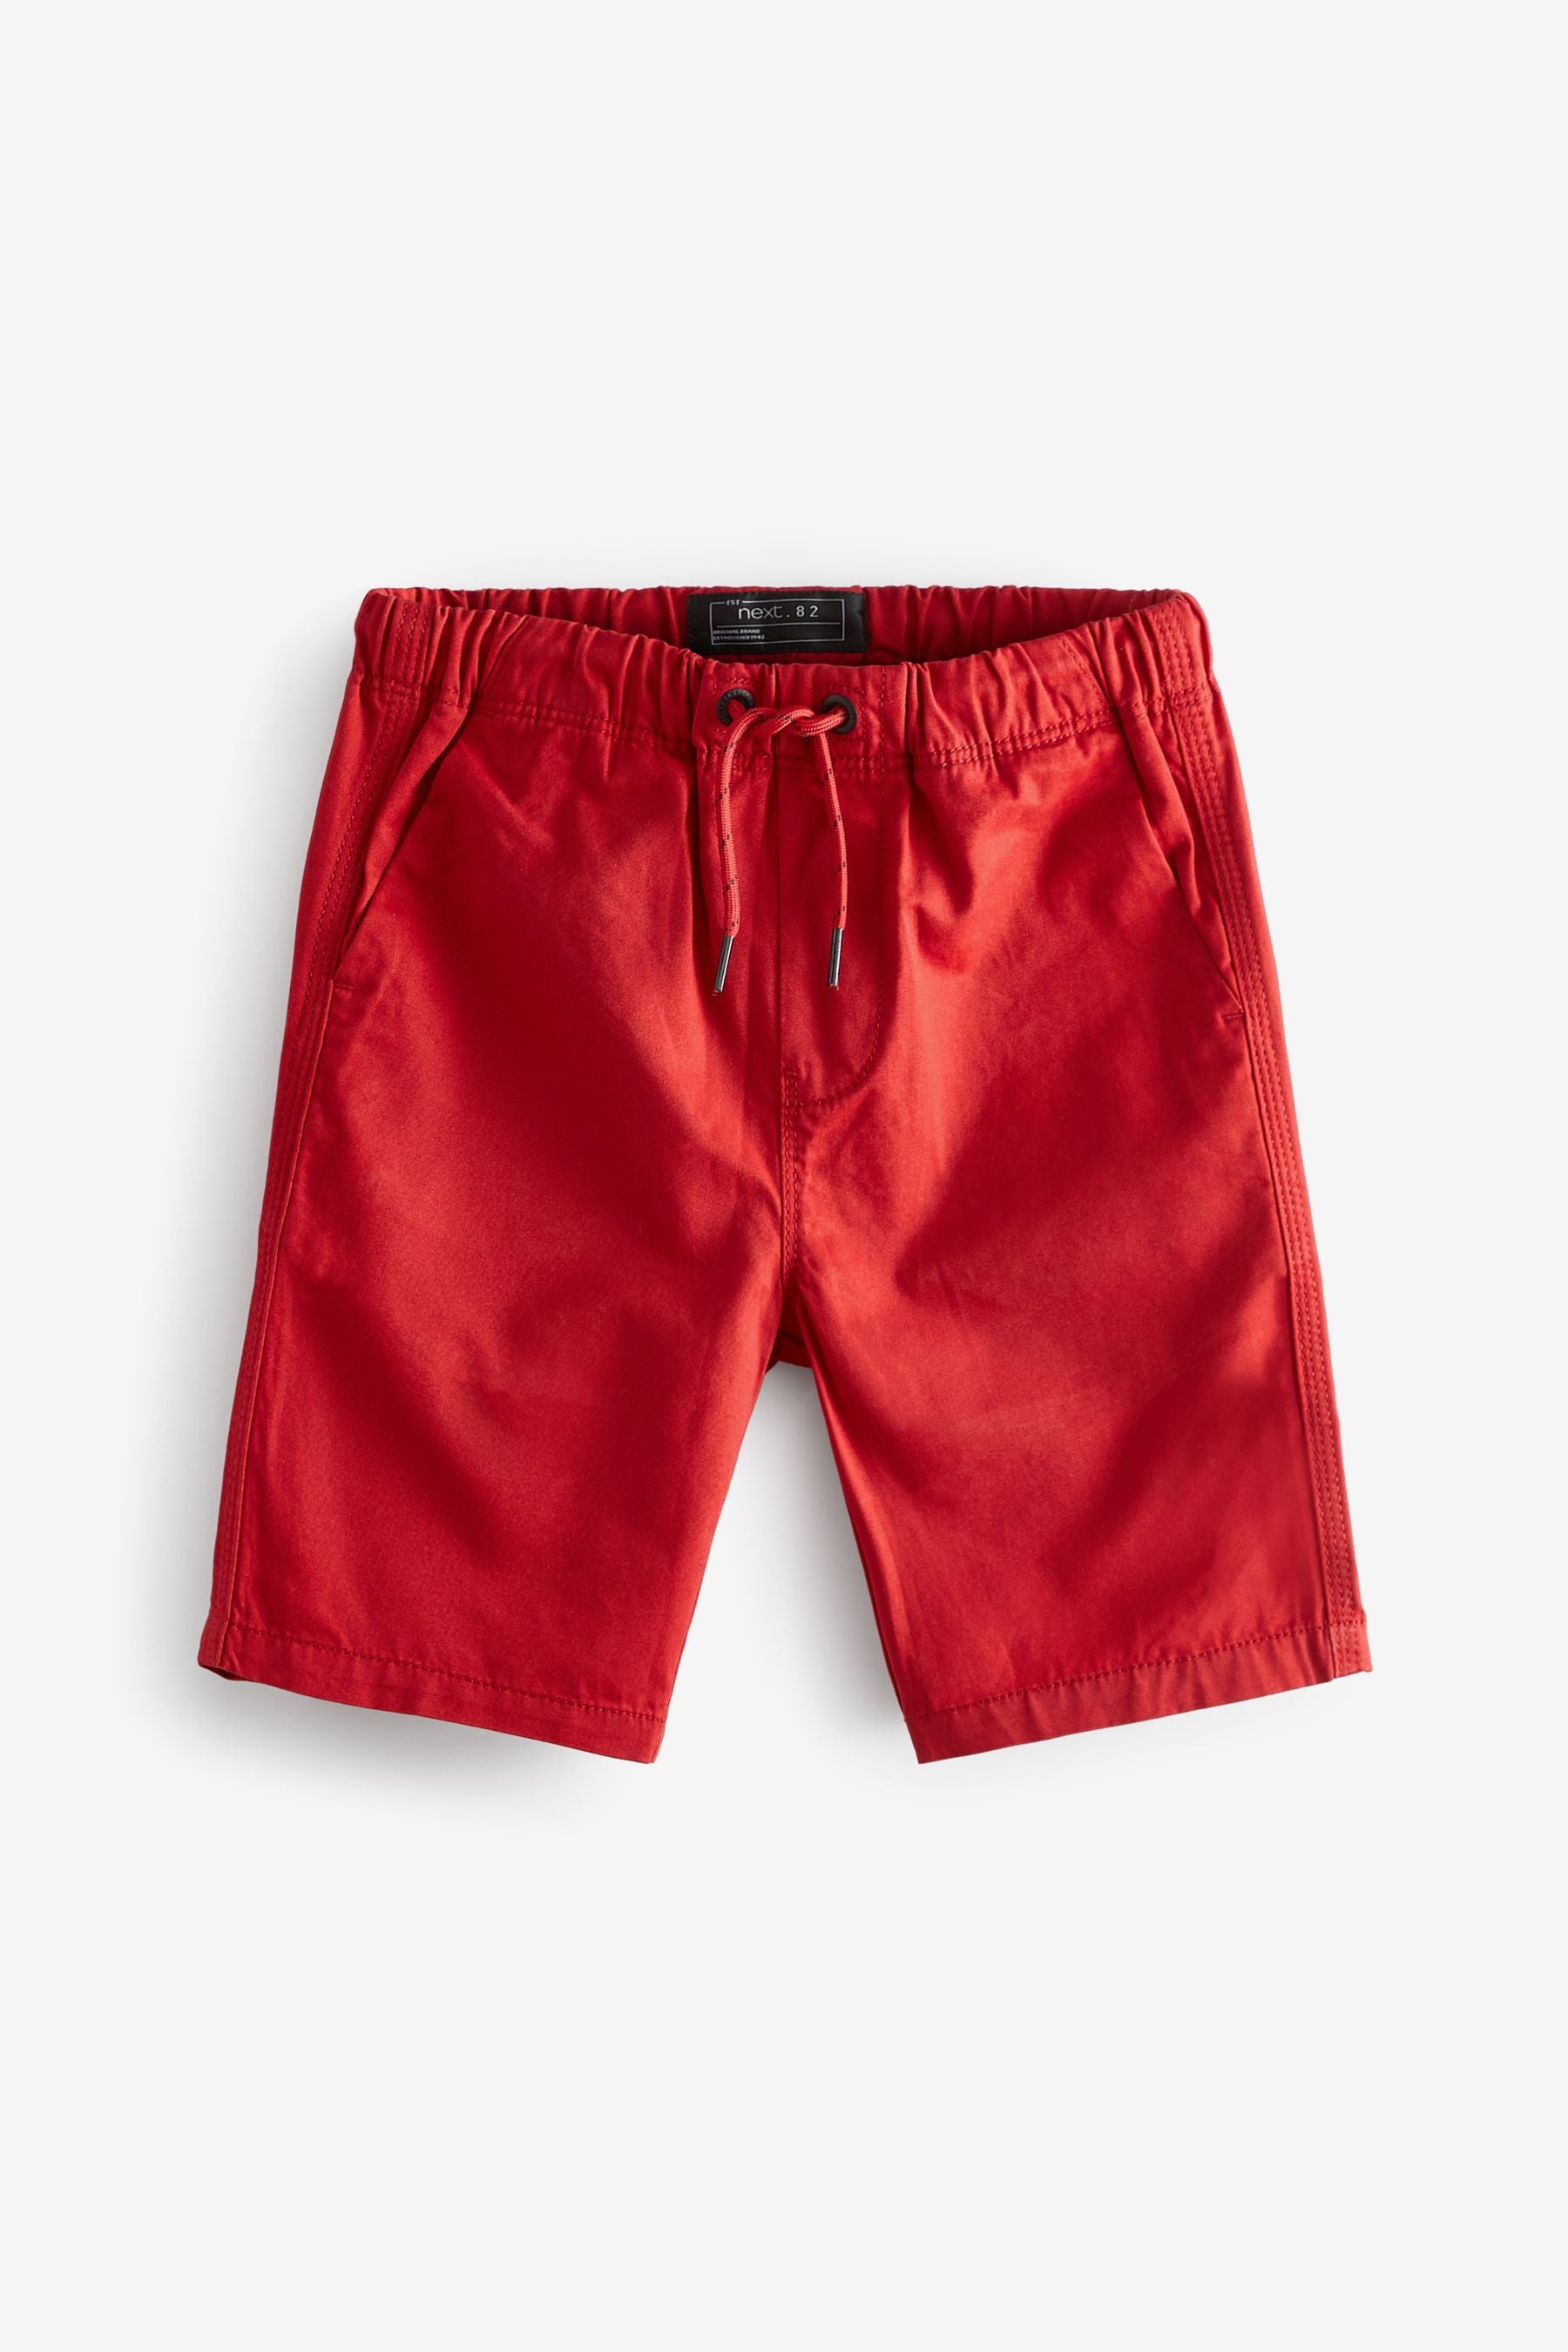 Red/Blue 3 Pack Pull-On Shorts (3-16yrs)